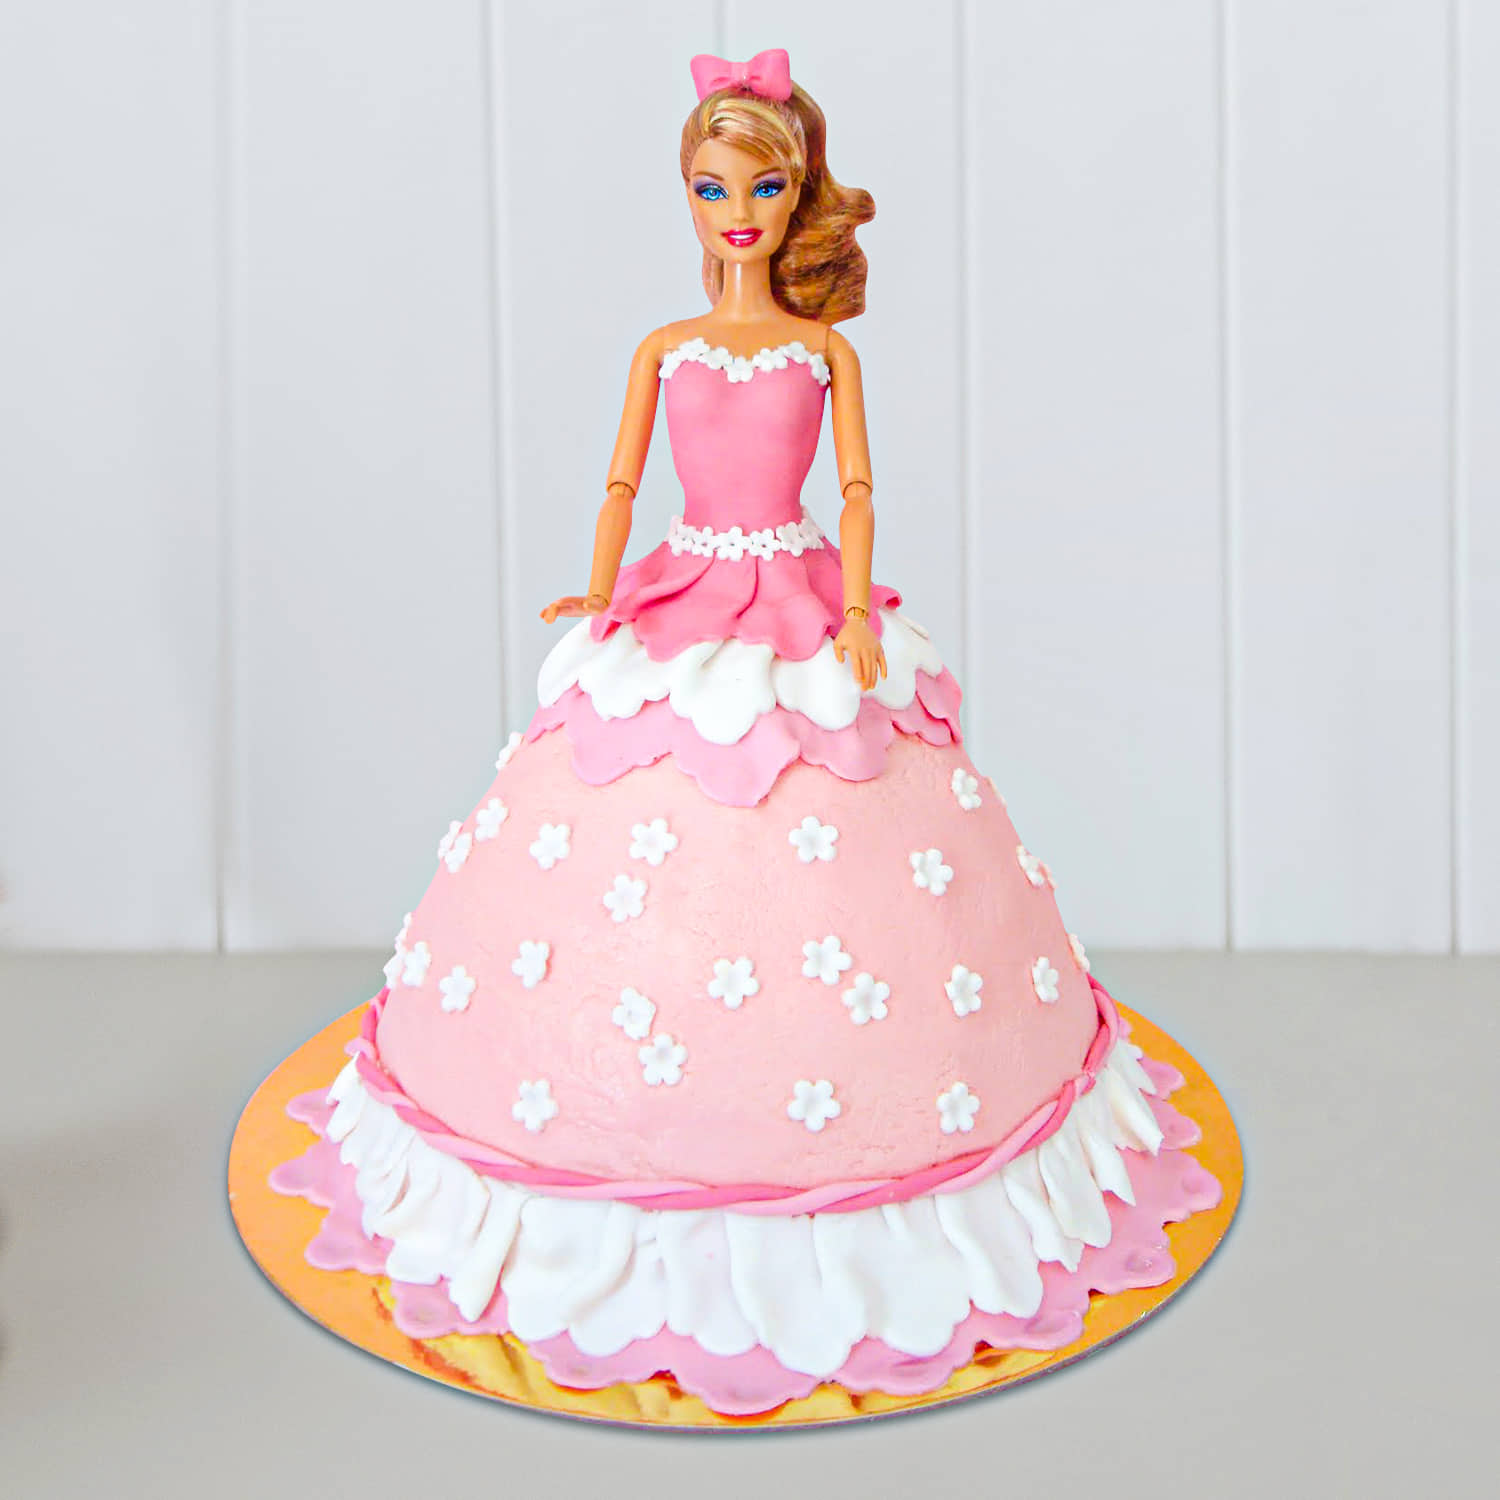 Stylish Girl Cake - How to Make the Easiest Doll Cake - Roxy's Kitchen